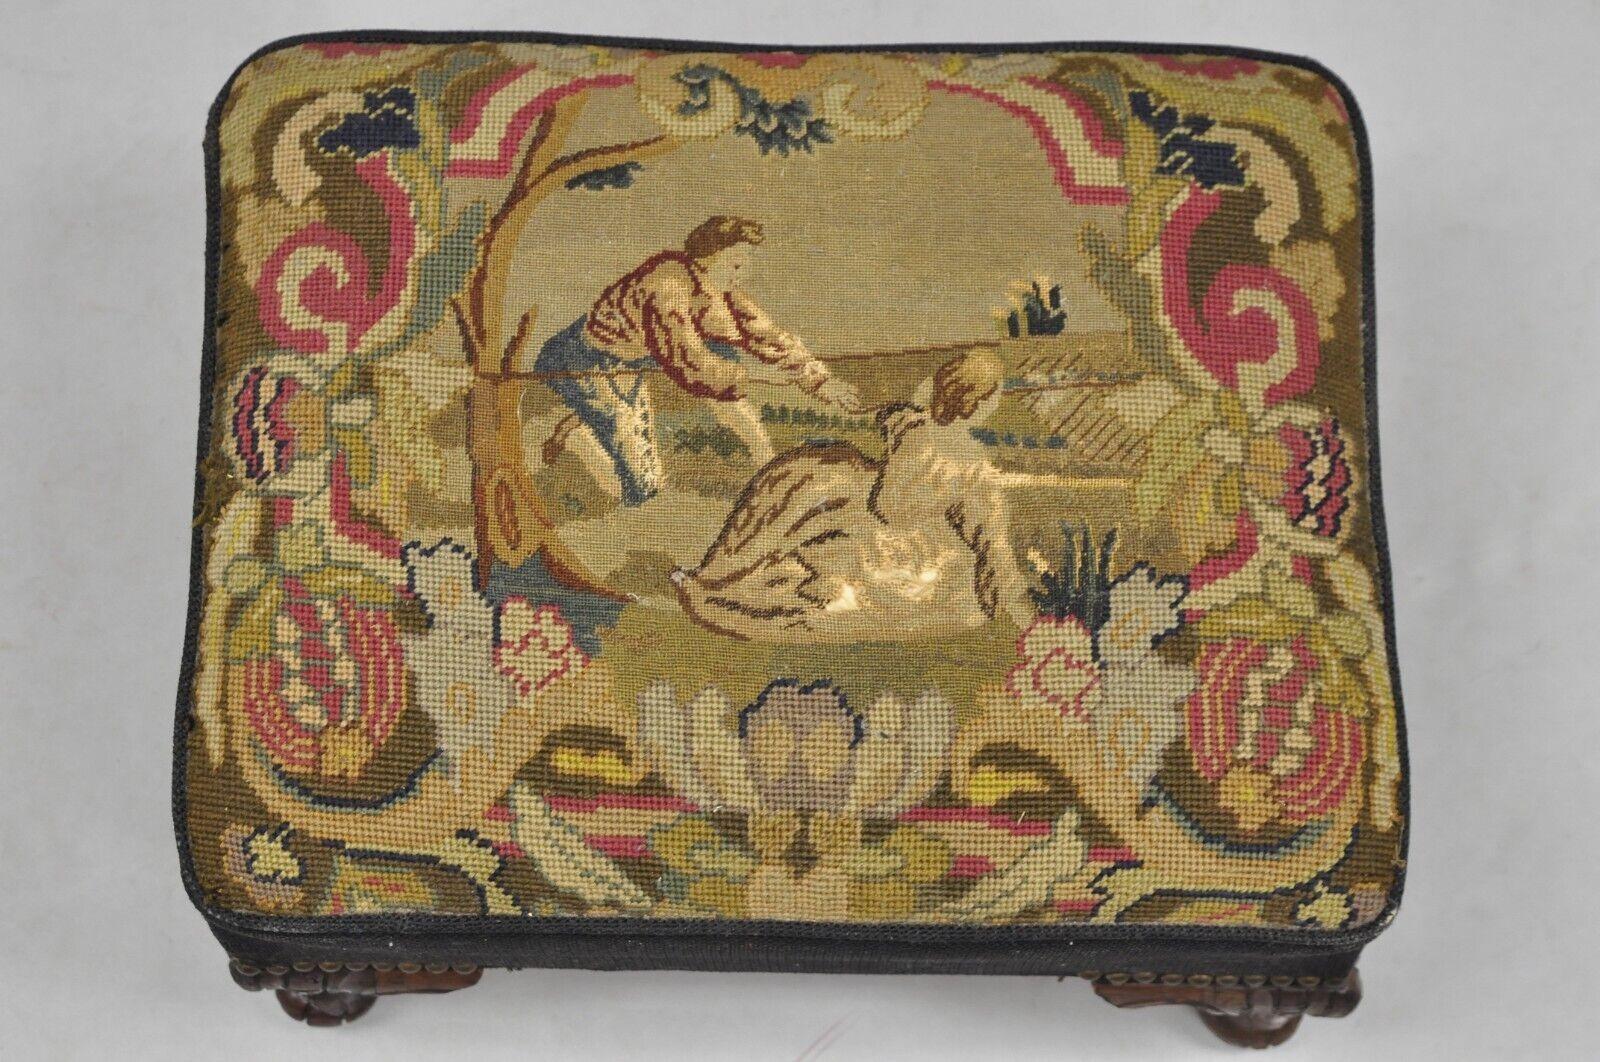 Antique French Figural Needlepoint Box Footstool Ottoman on Mahogany Legs. Item featured believed to be a vintage custom made item using Antique French needlepoint tapestry and vintage carved mahogany legs on a custom box wooden frame. Very well